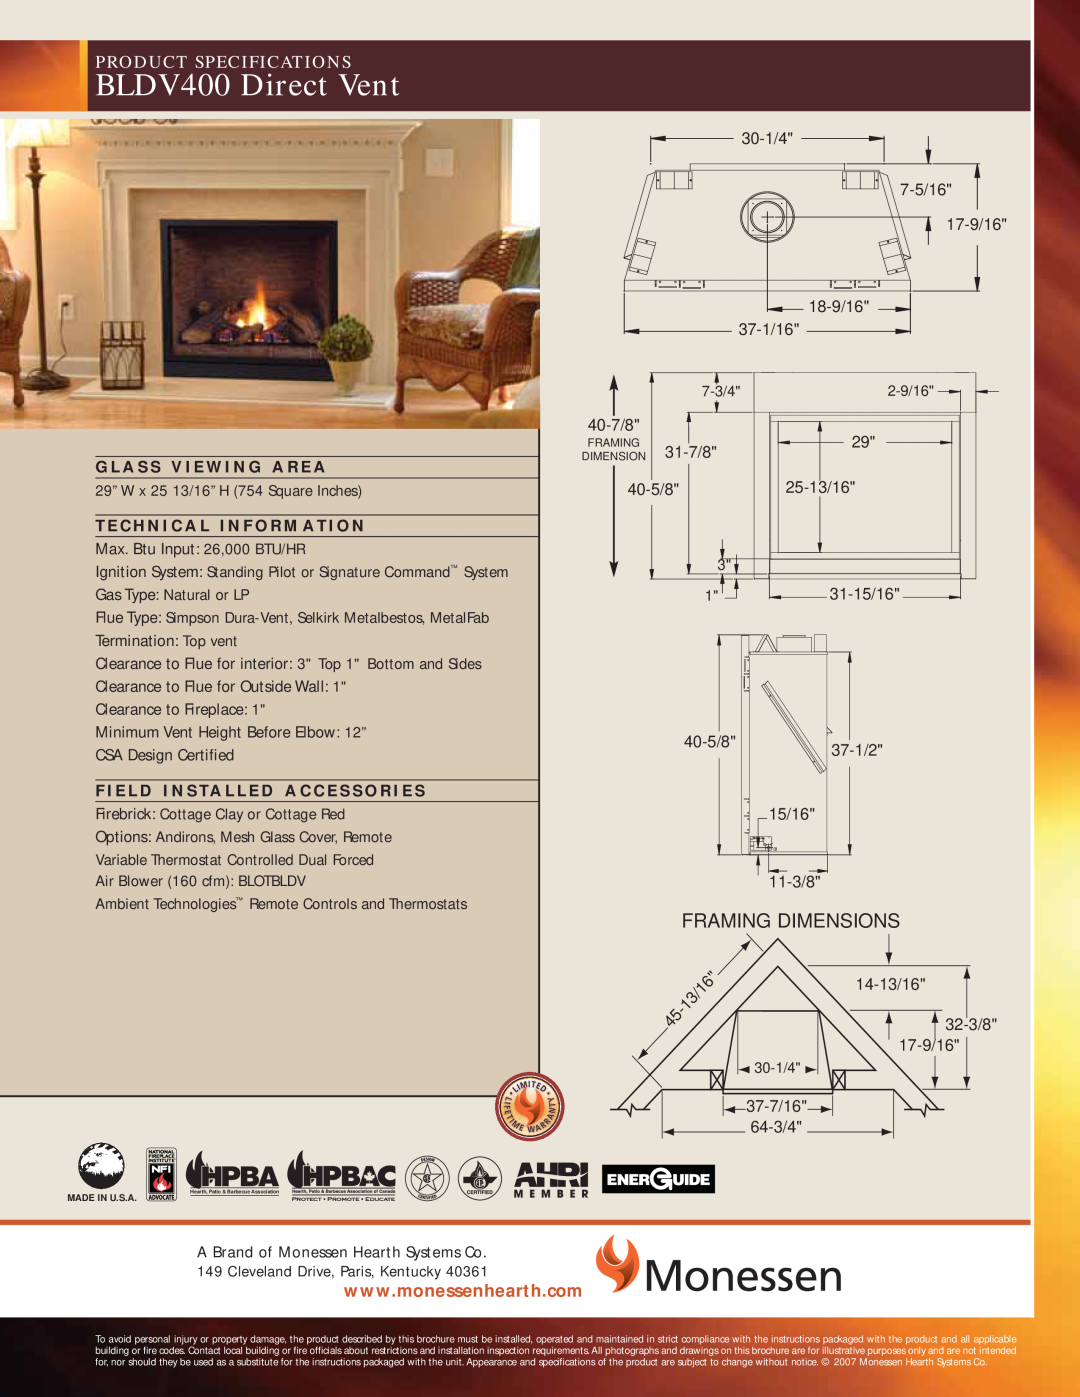 Monessen Hearth dimensions BLDV400 Direct Vent, Framing Dimensions, Product Specifications 